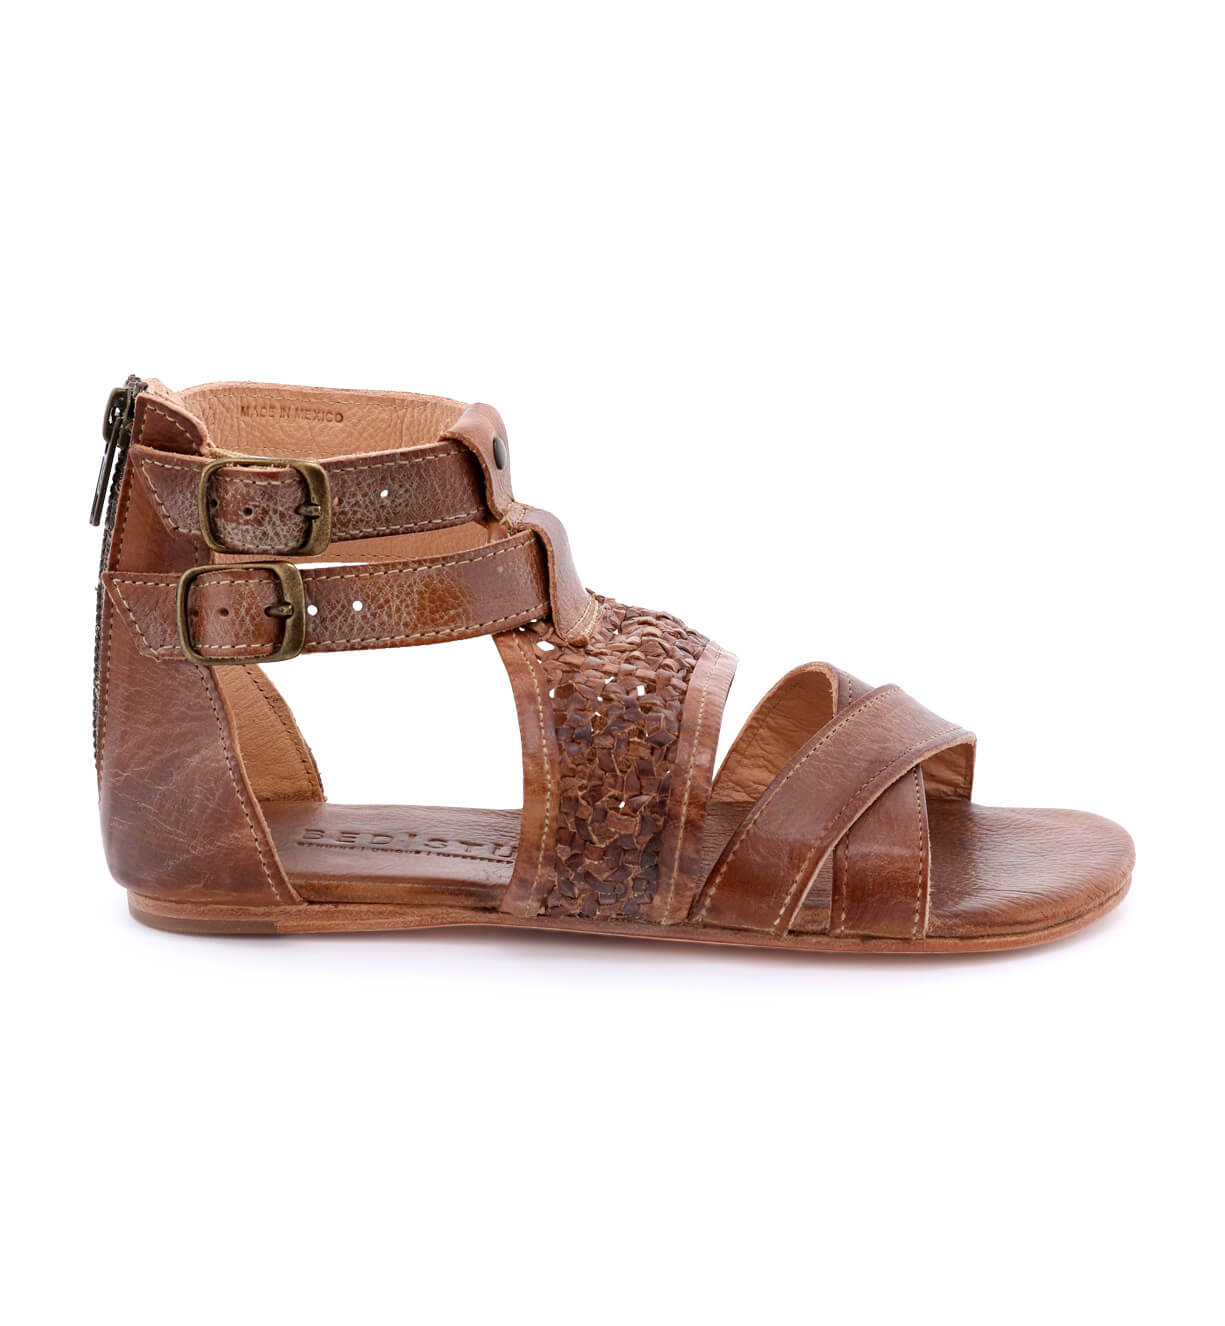 A Capriana sandal by Bed Stu - a women's brown sandal with straps and buckles.